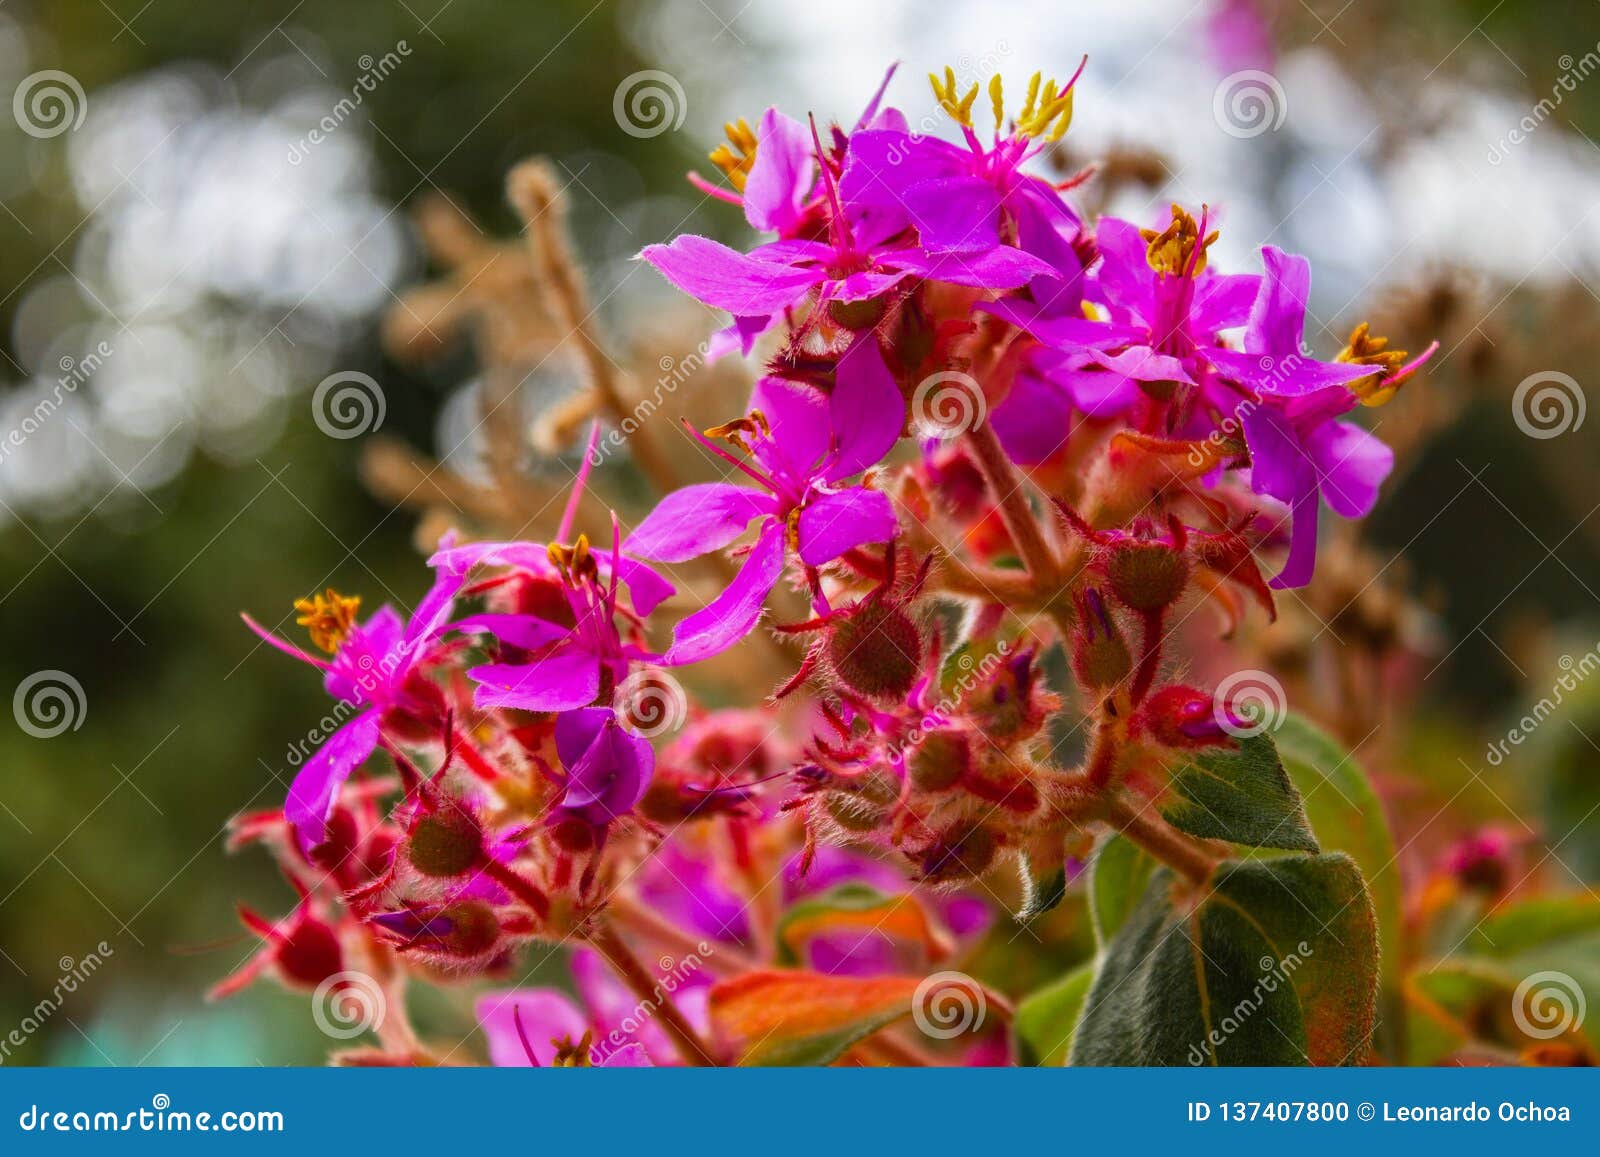 purple and pink flowers of the mirador